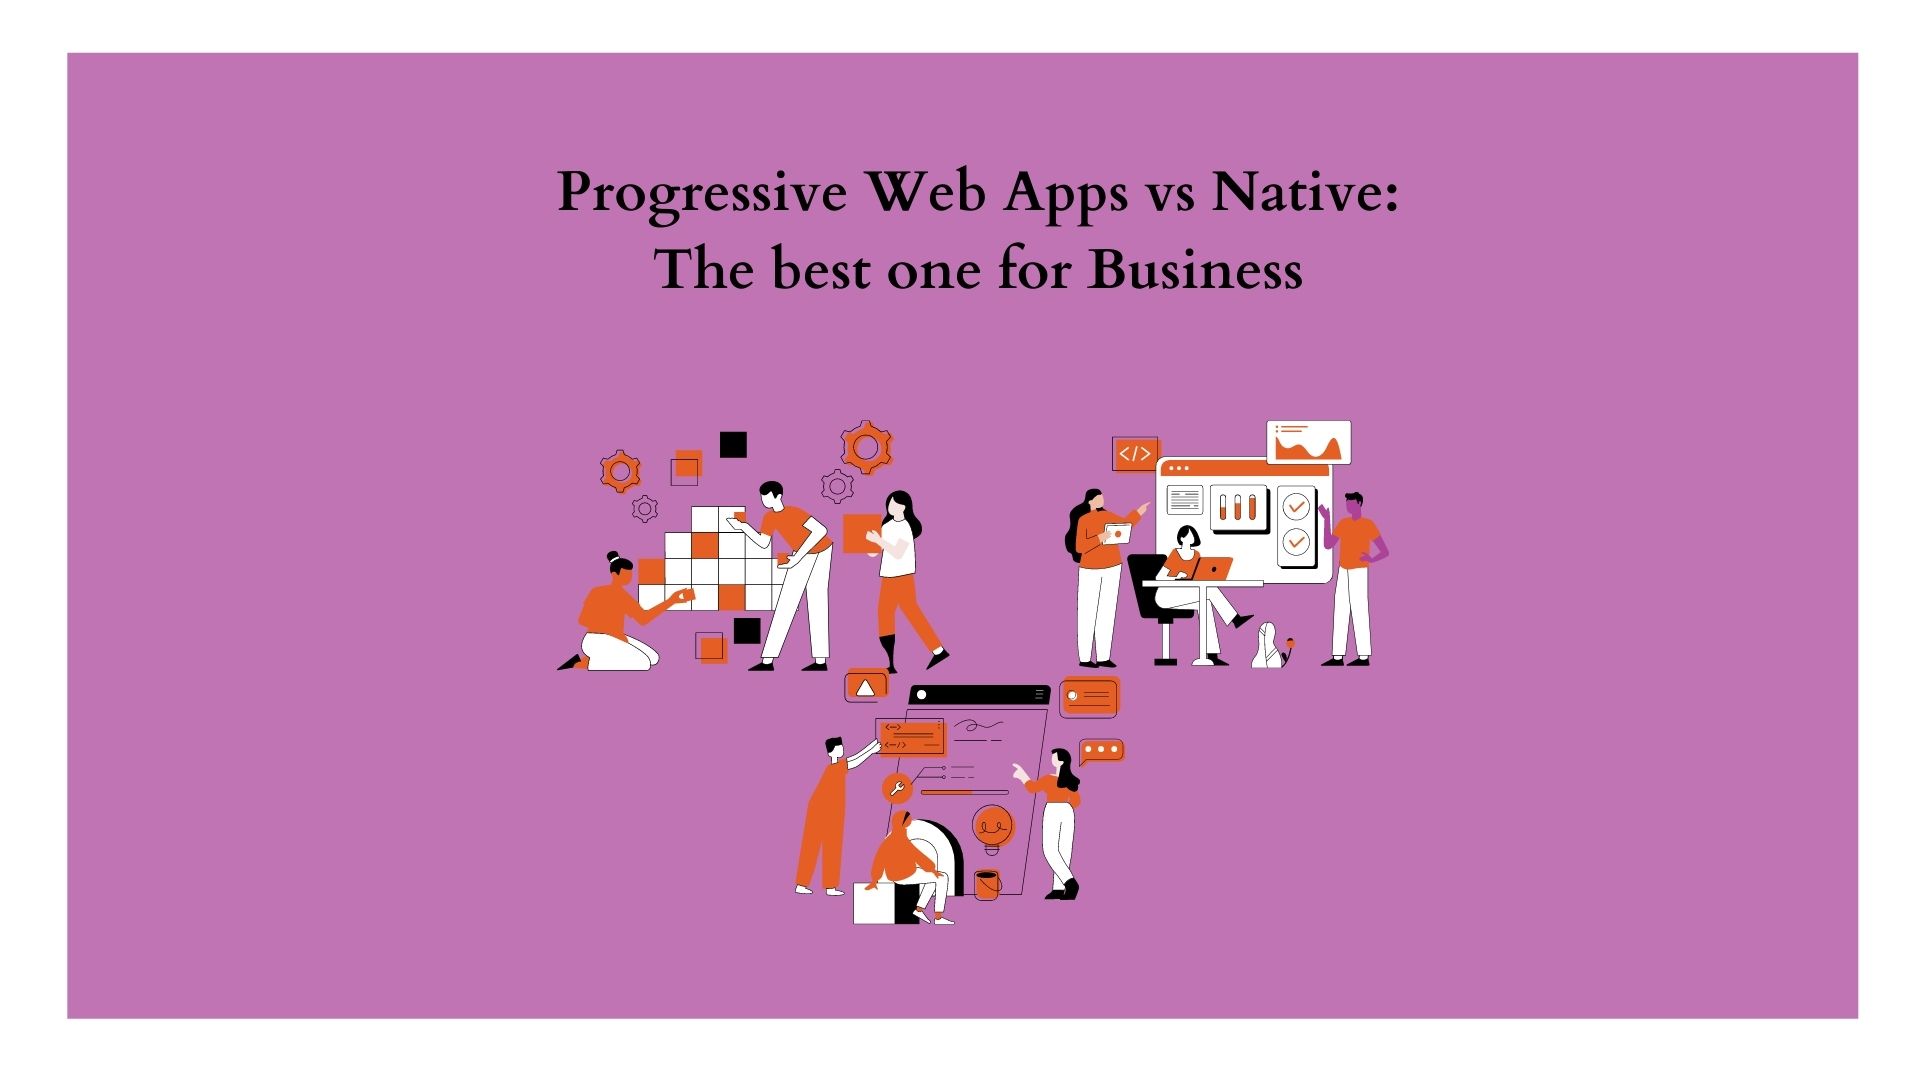 Progressive Web Apps vs Native: The best one for Business